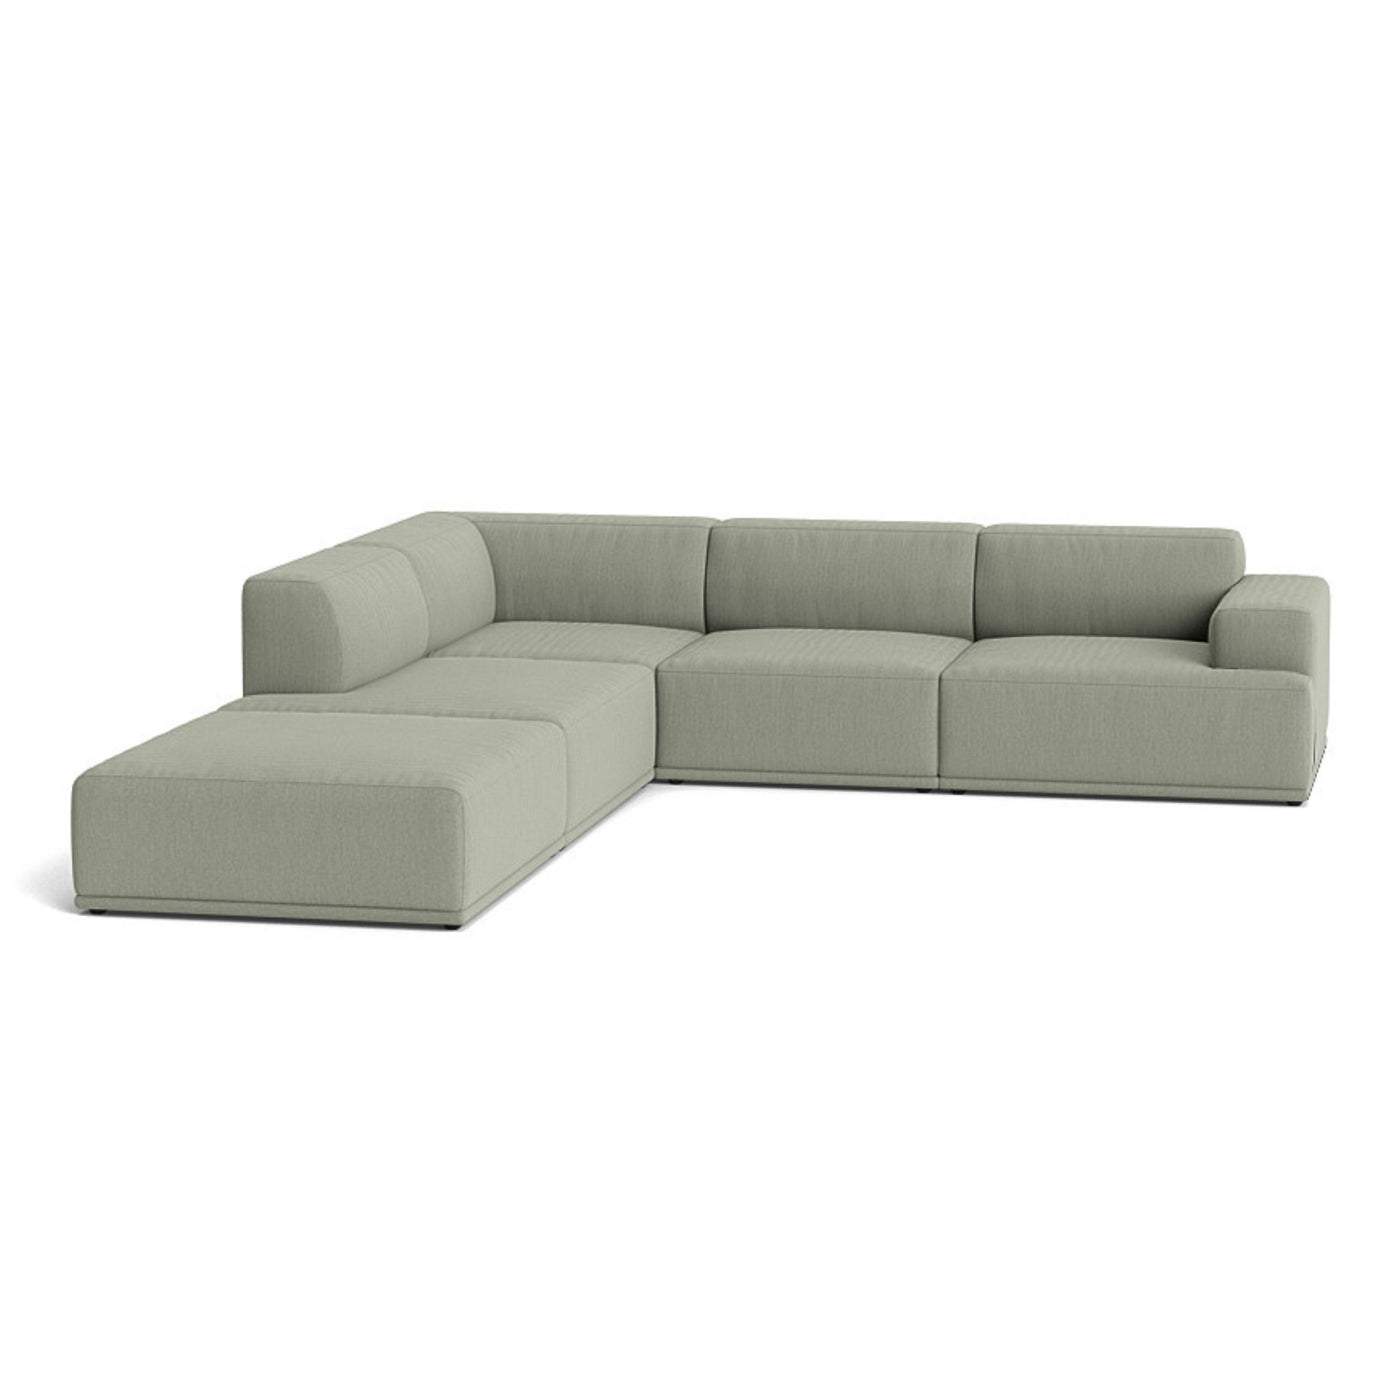 Muuto Connect Soft Modular Corner Sofa, configuration 1. Made-to-order from someday designs. #colour_re-wool-408